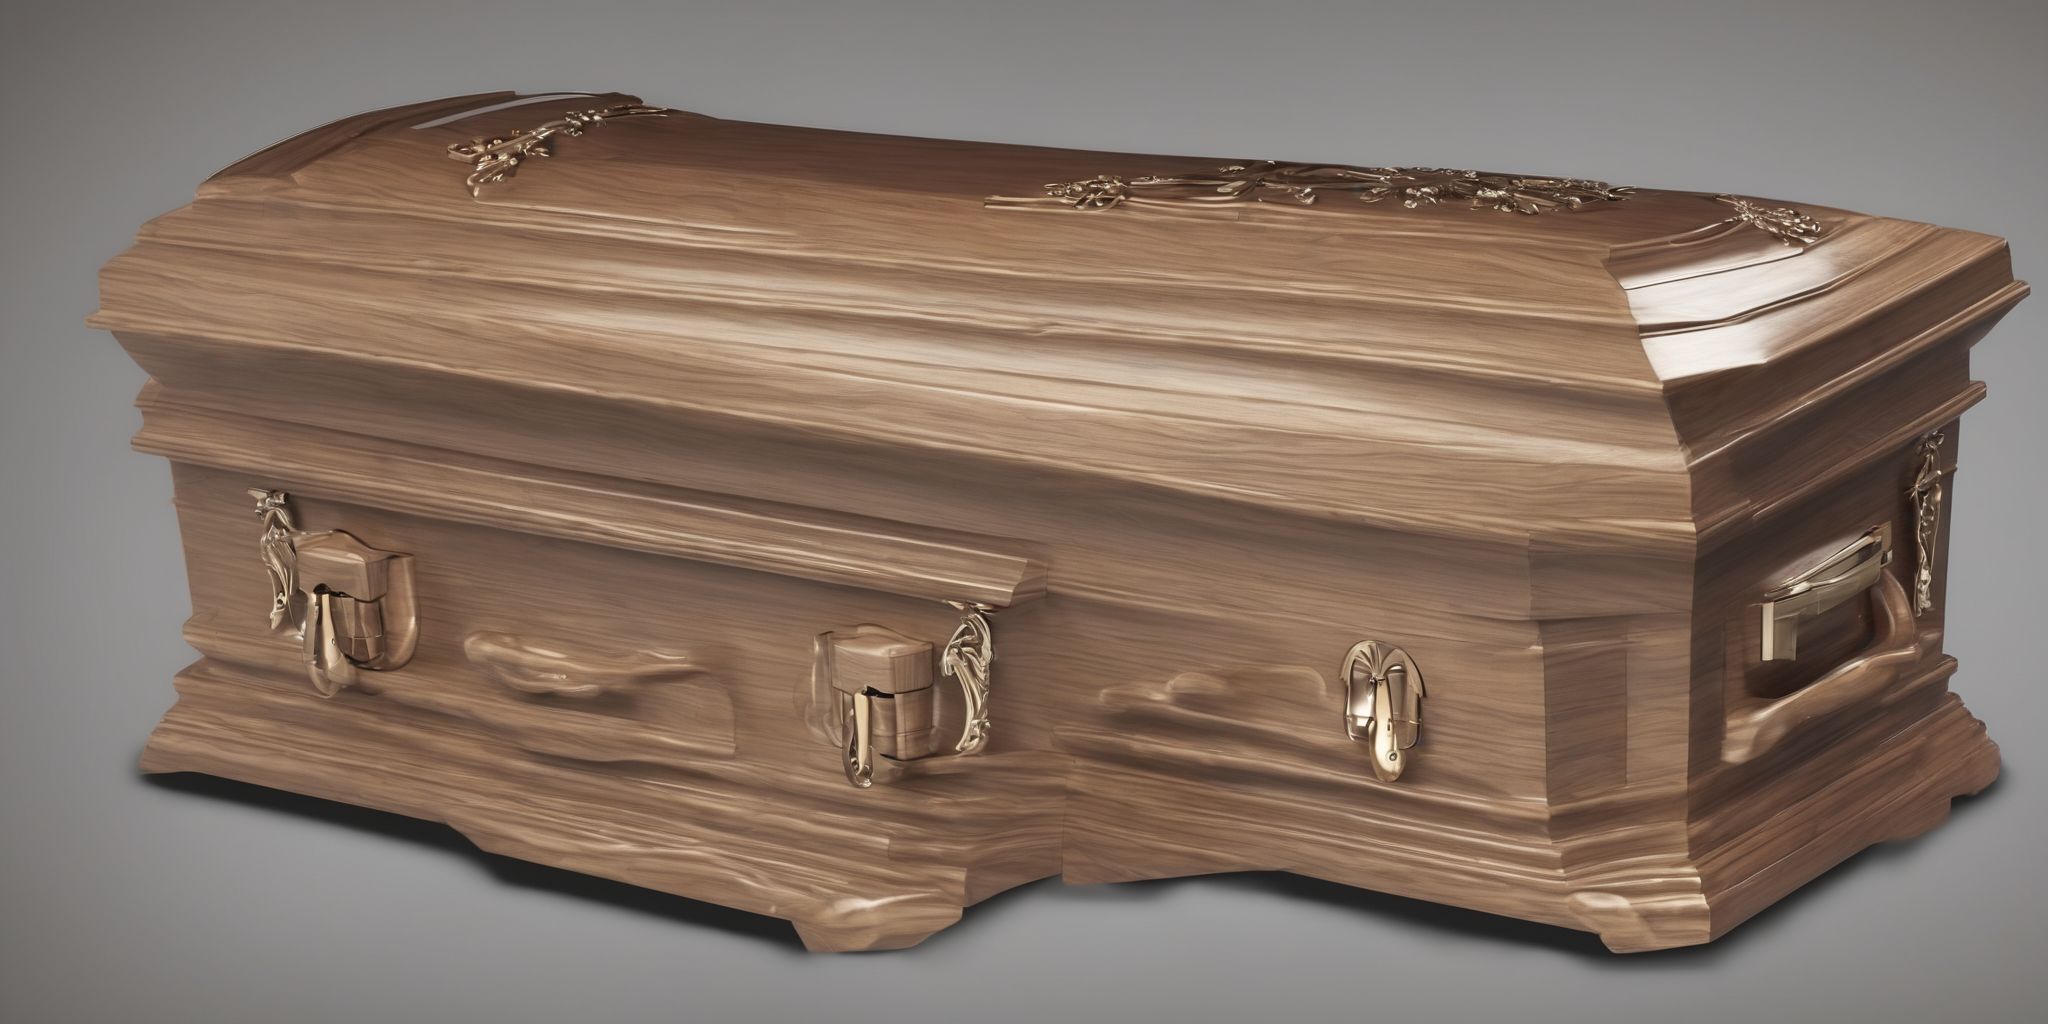 Casket  in realistic, photographic style